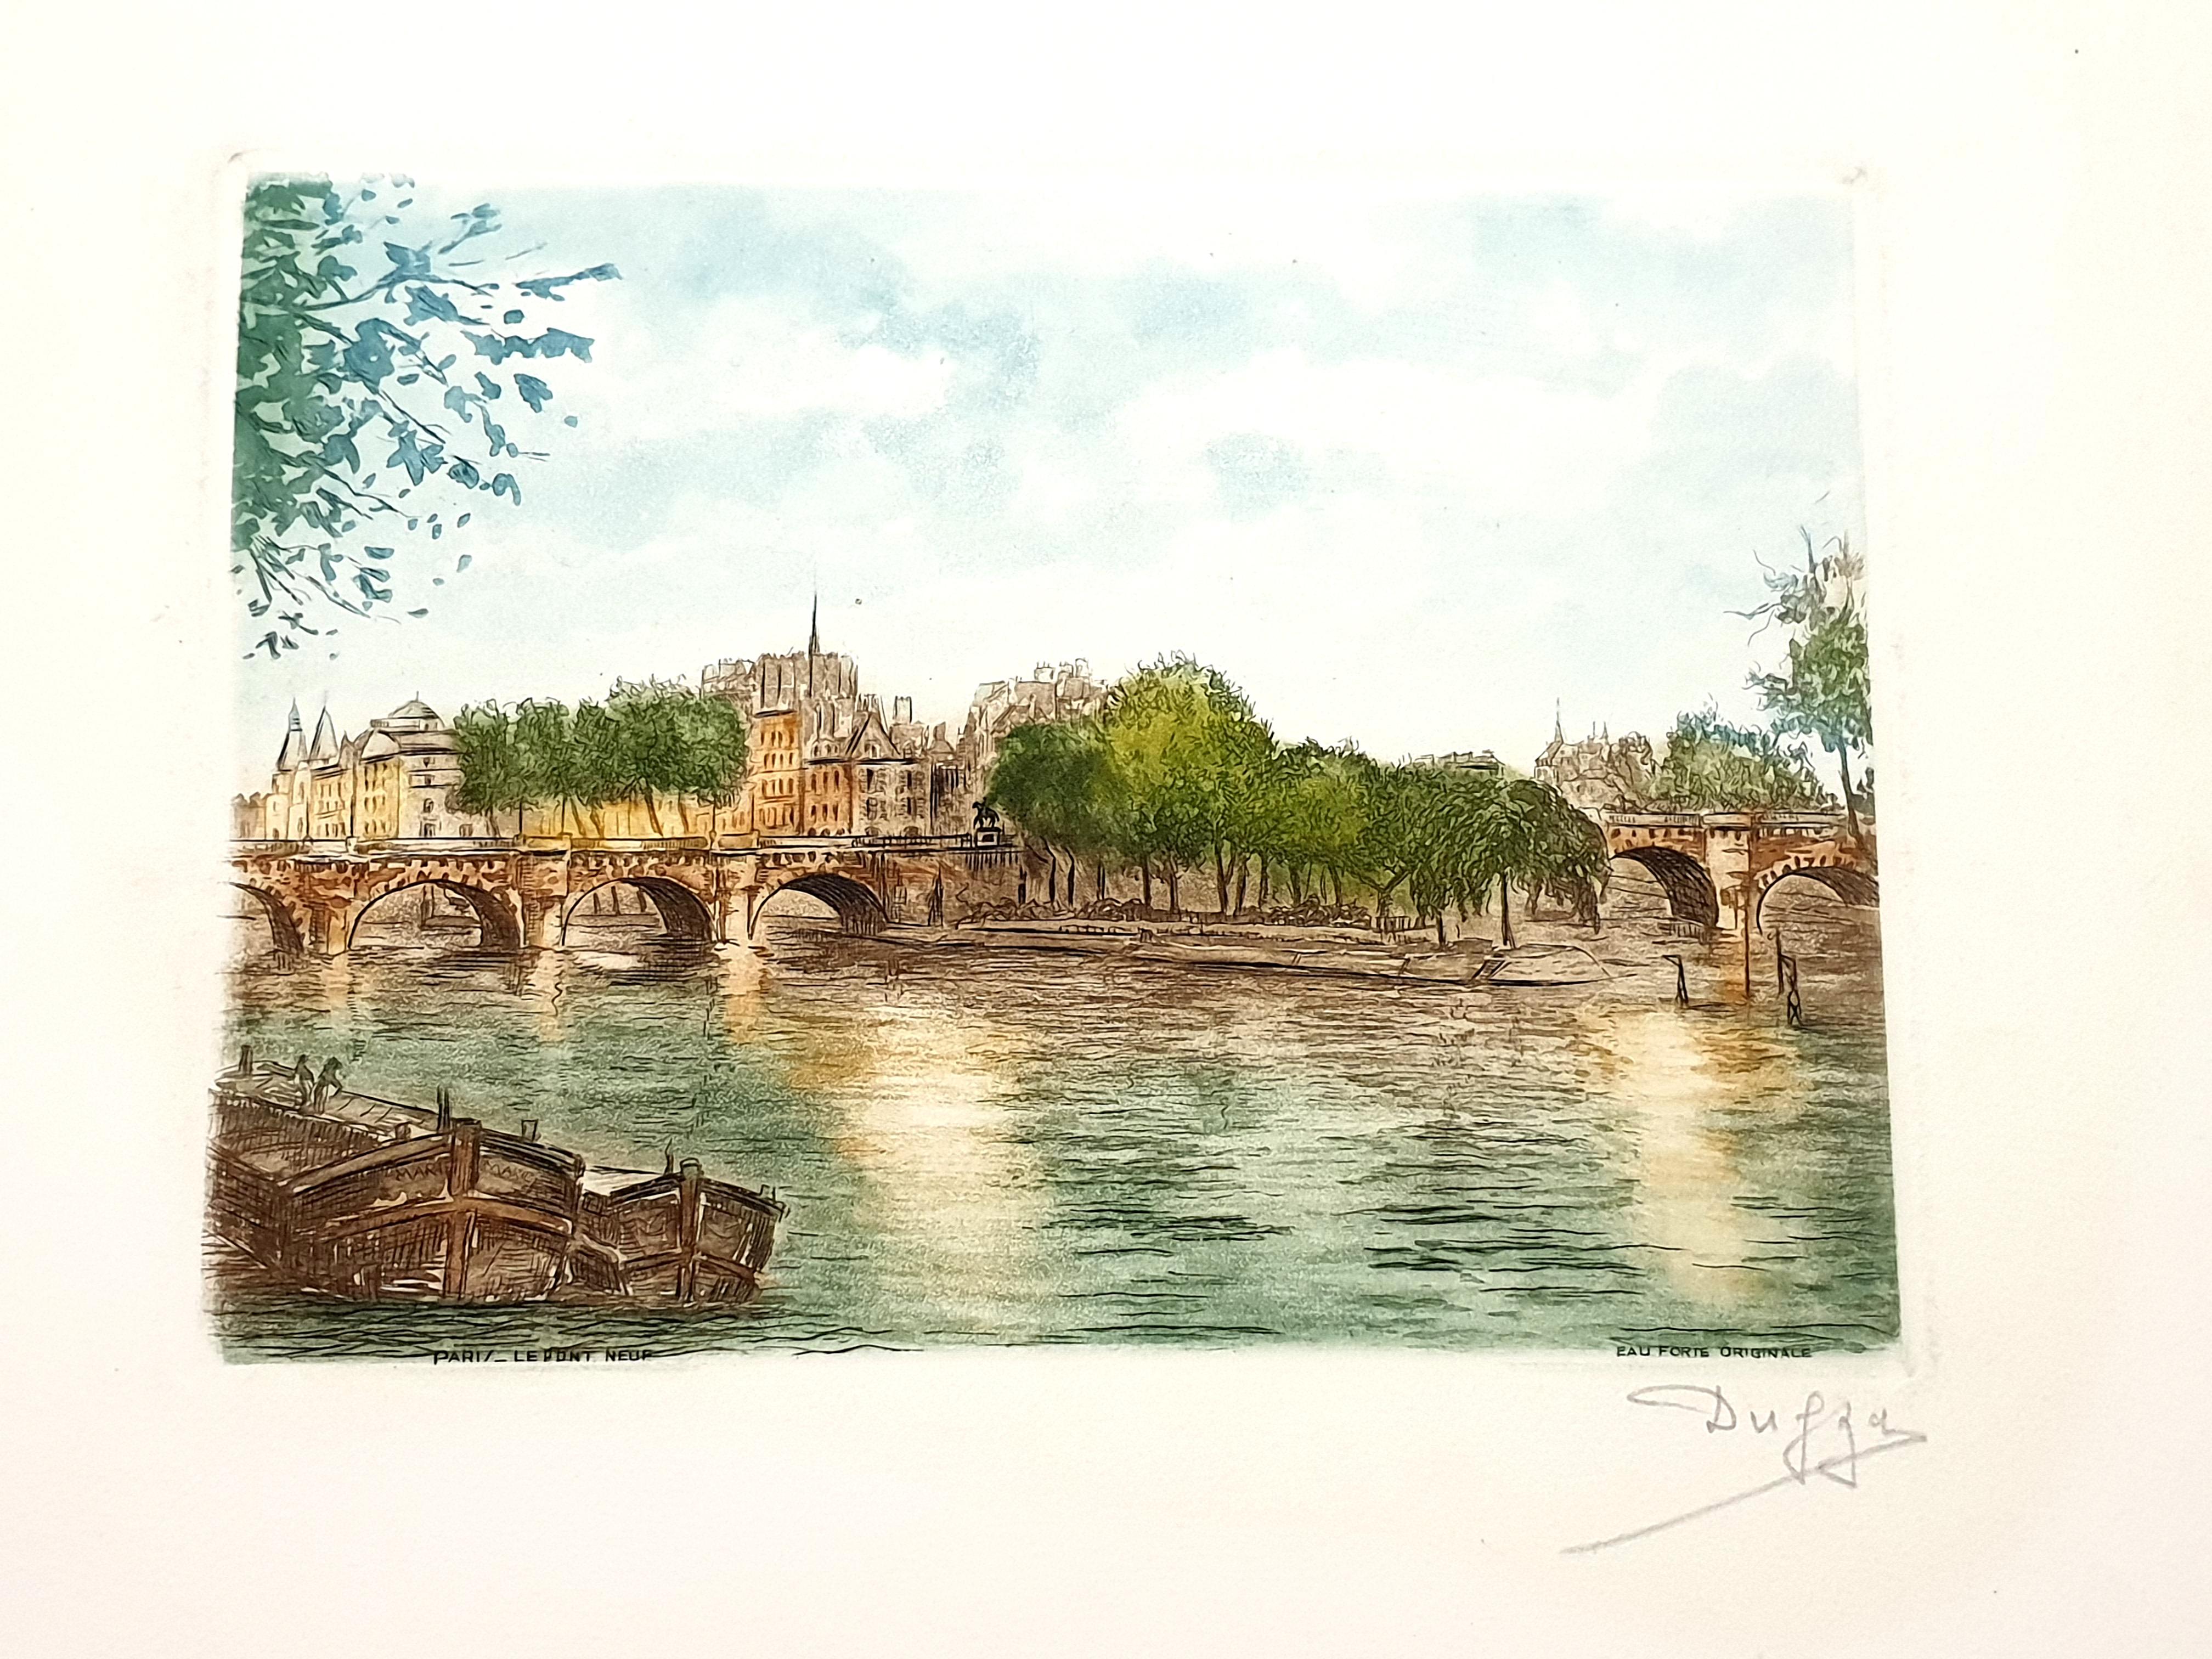 Dufza - Paris - Le Pont Neuf - Original Handsigned Etching
Circa 1940
Handsigned in pencil
Dimensions: 20 x 25 cm
Unumbered as issued  